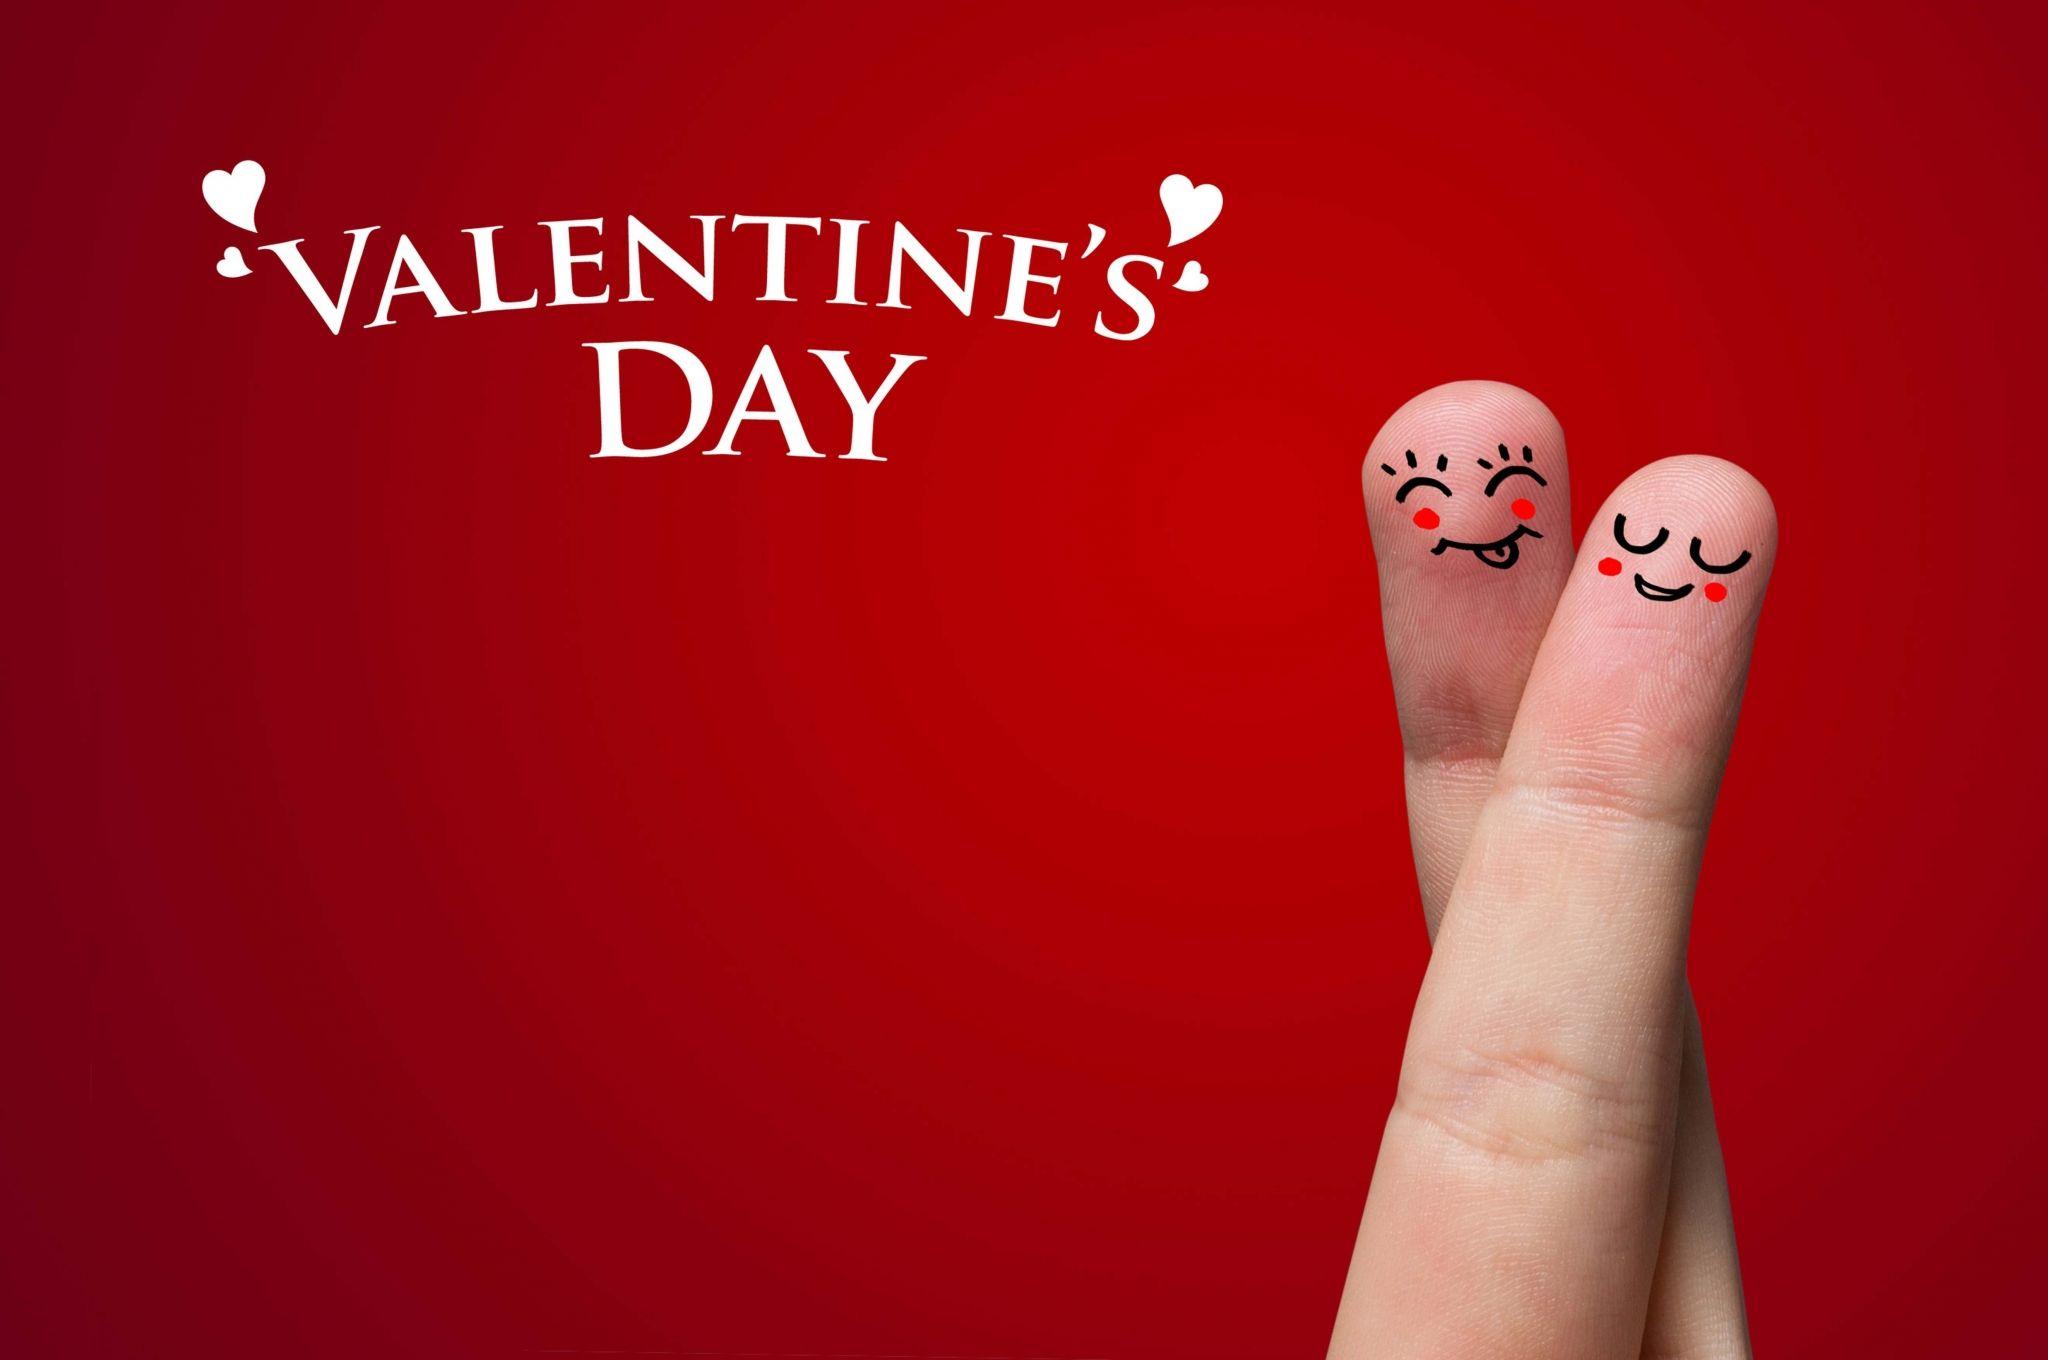 valentines day HD wallpaper 1080p high quality